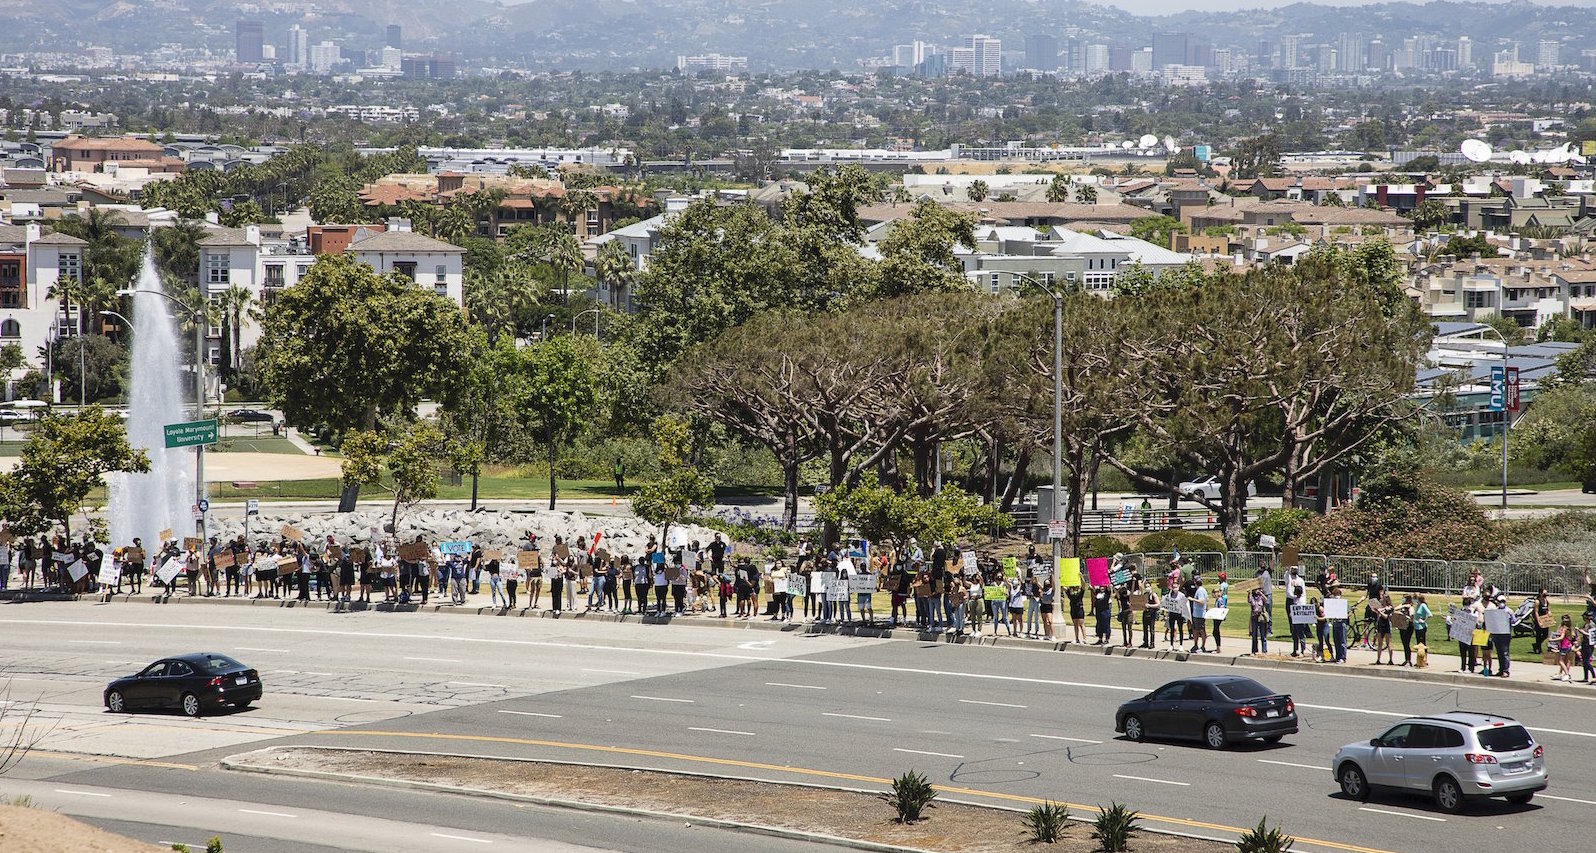 LMU students marching in support of Black Lives Matter